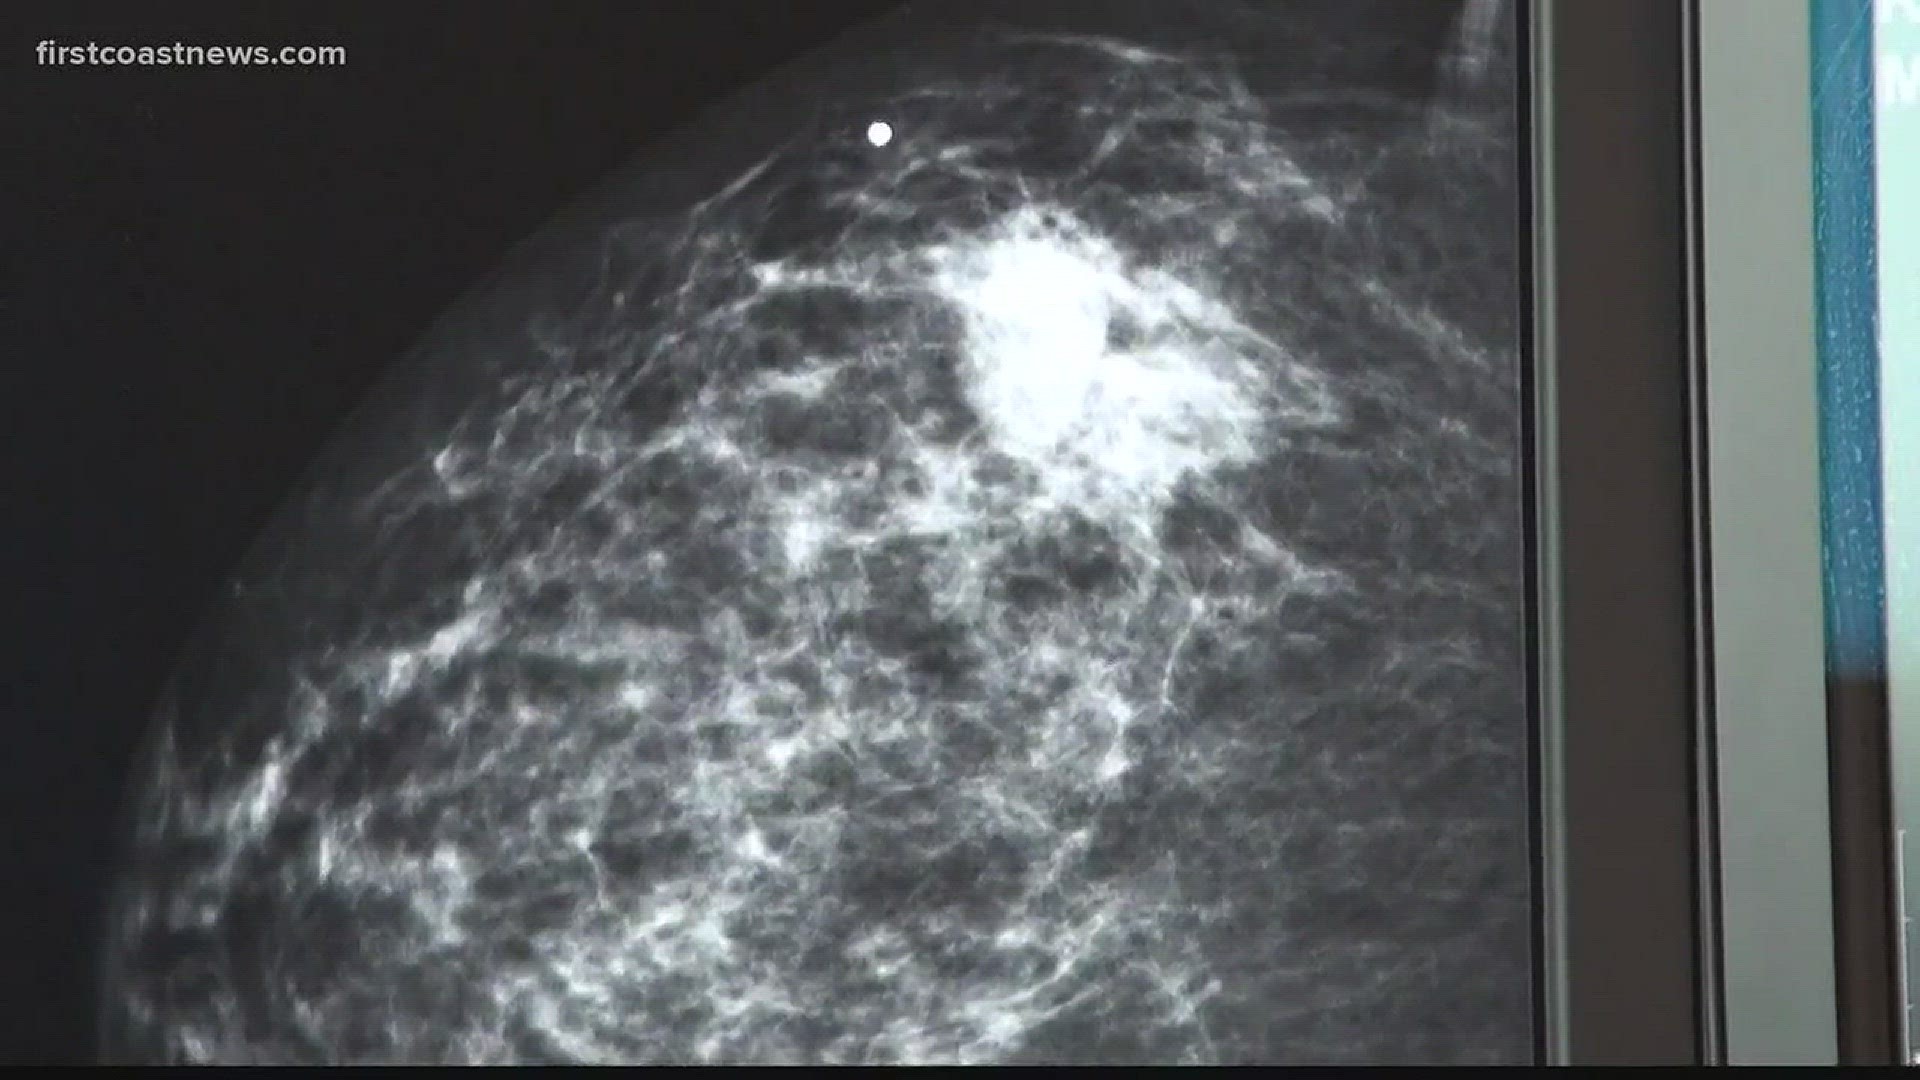 Ezorine found triple negative breast cancer before it invaded her lymph nodes.